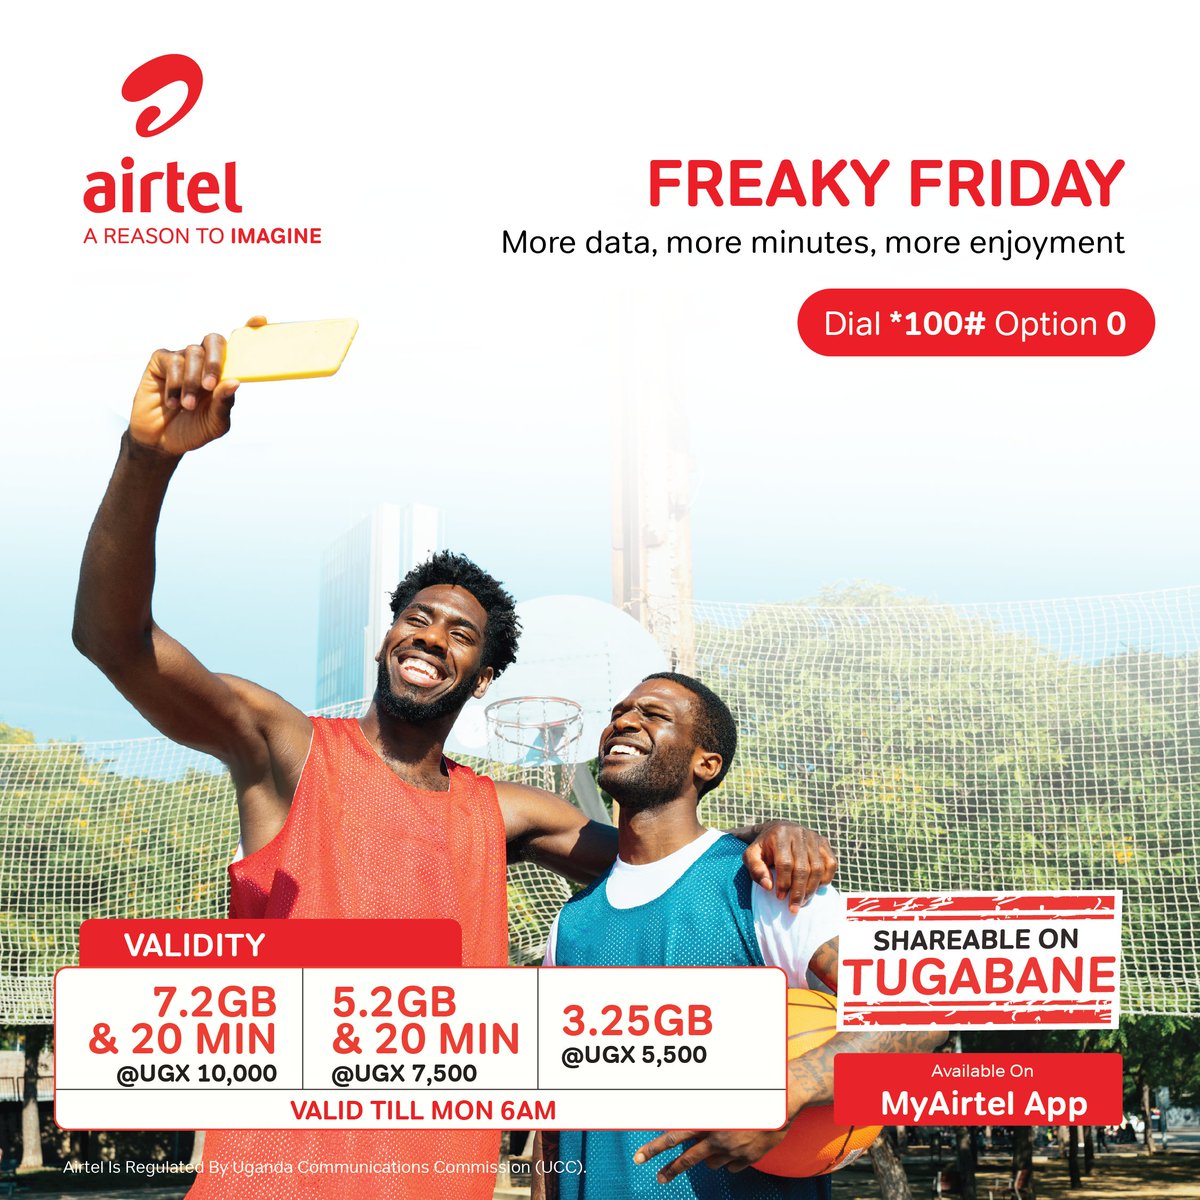 Enjoy #FreakyFriday benefits all weekend long. Activate your Freaky Friday bundle now 😊. Dial 100# and select Option 0 Or use the #MyAirtelApp airtelafrica.onelink.me/cGyr/qgj4qeu2